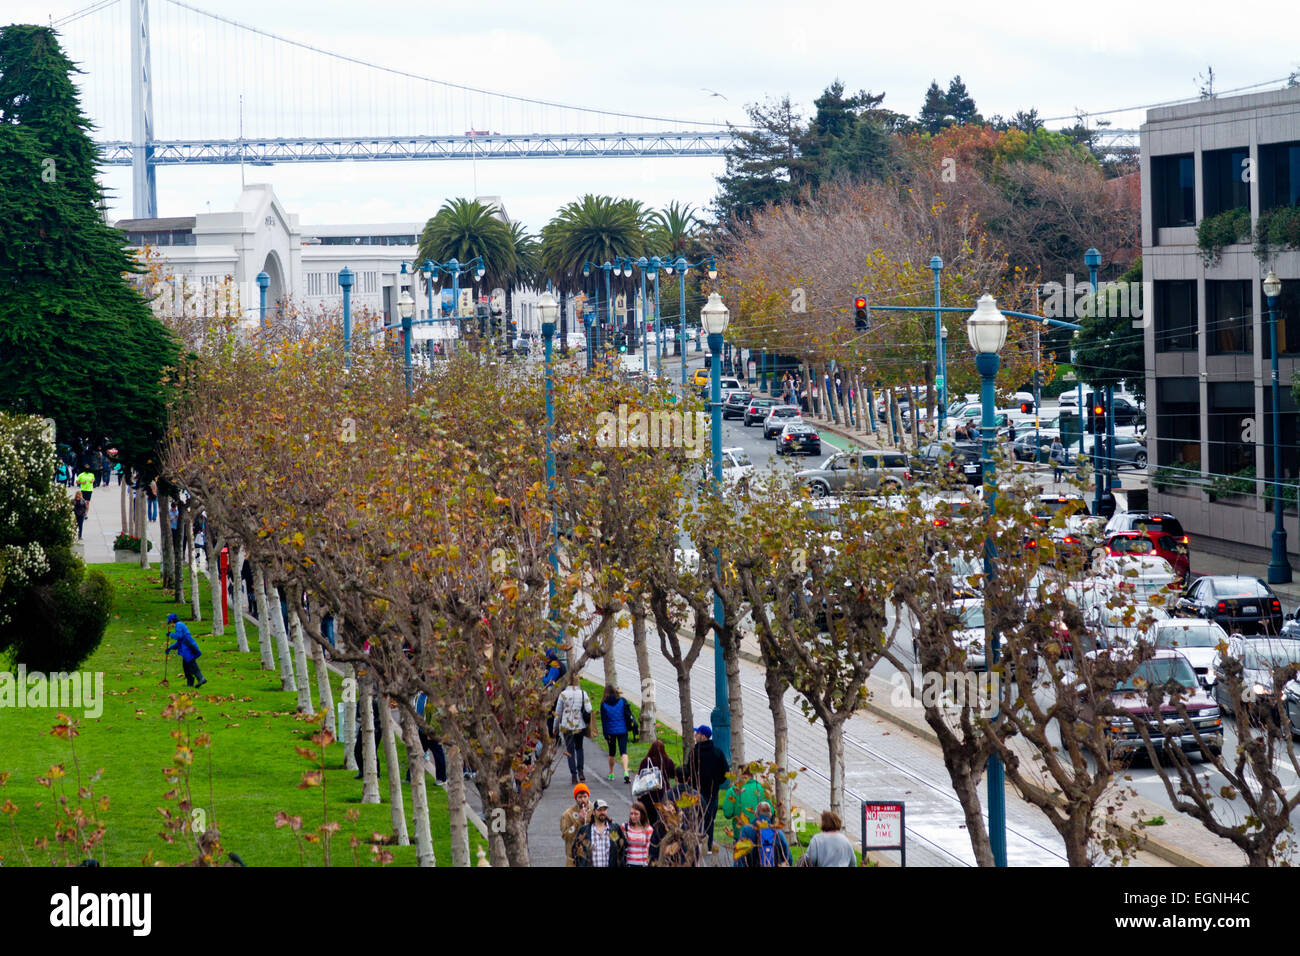 A view of the Embarcadero in San Francisco from an elevated position. Stock Photo